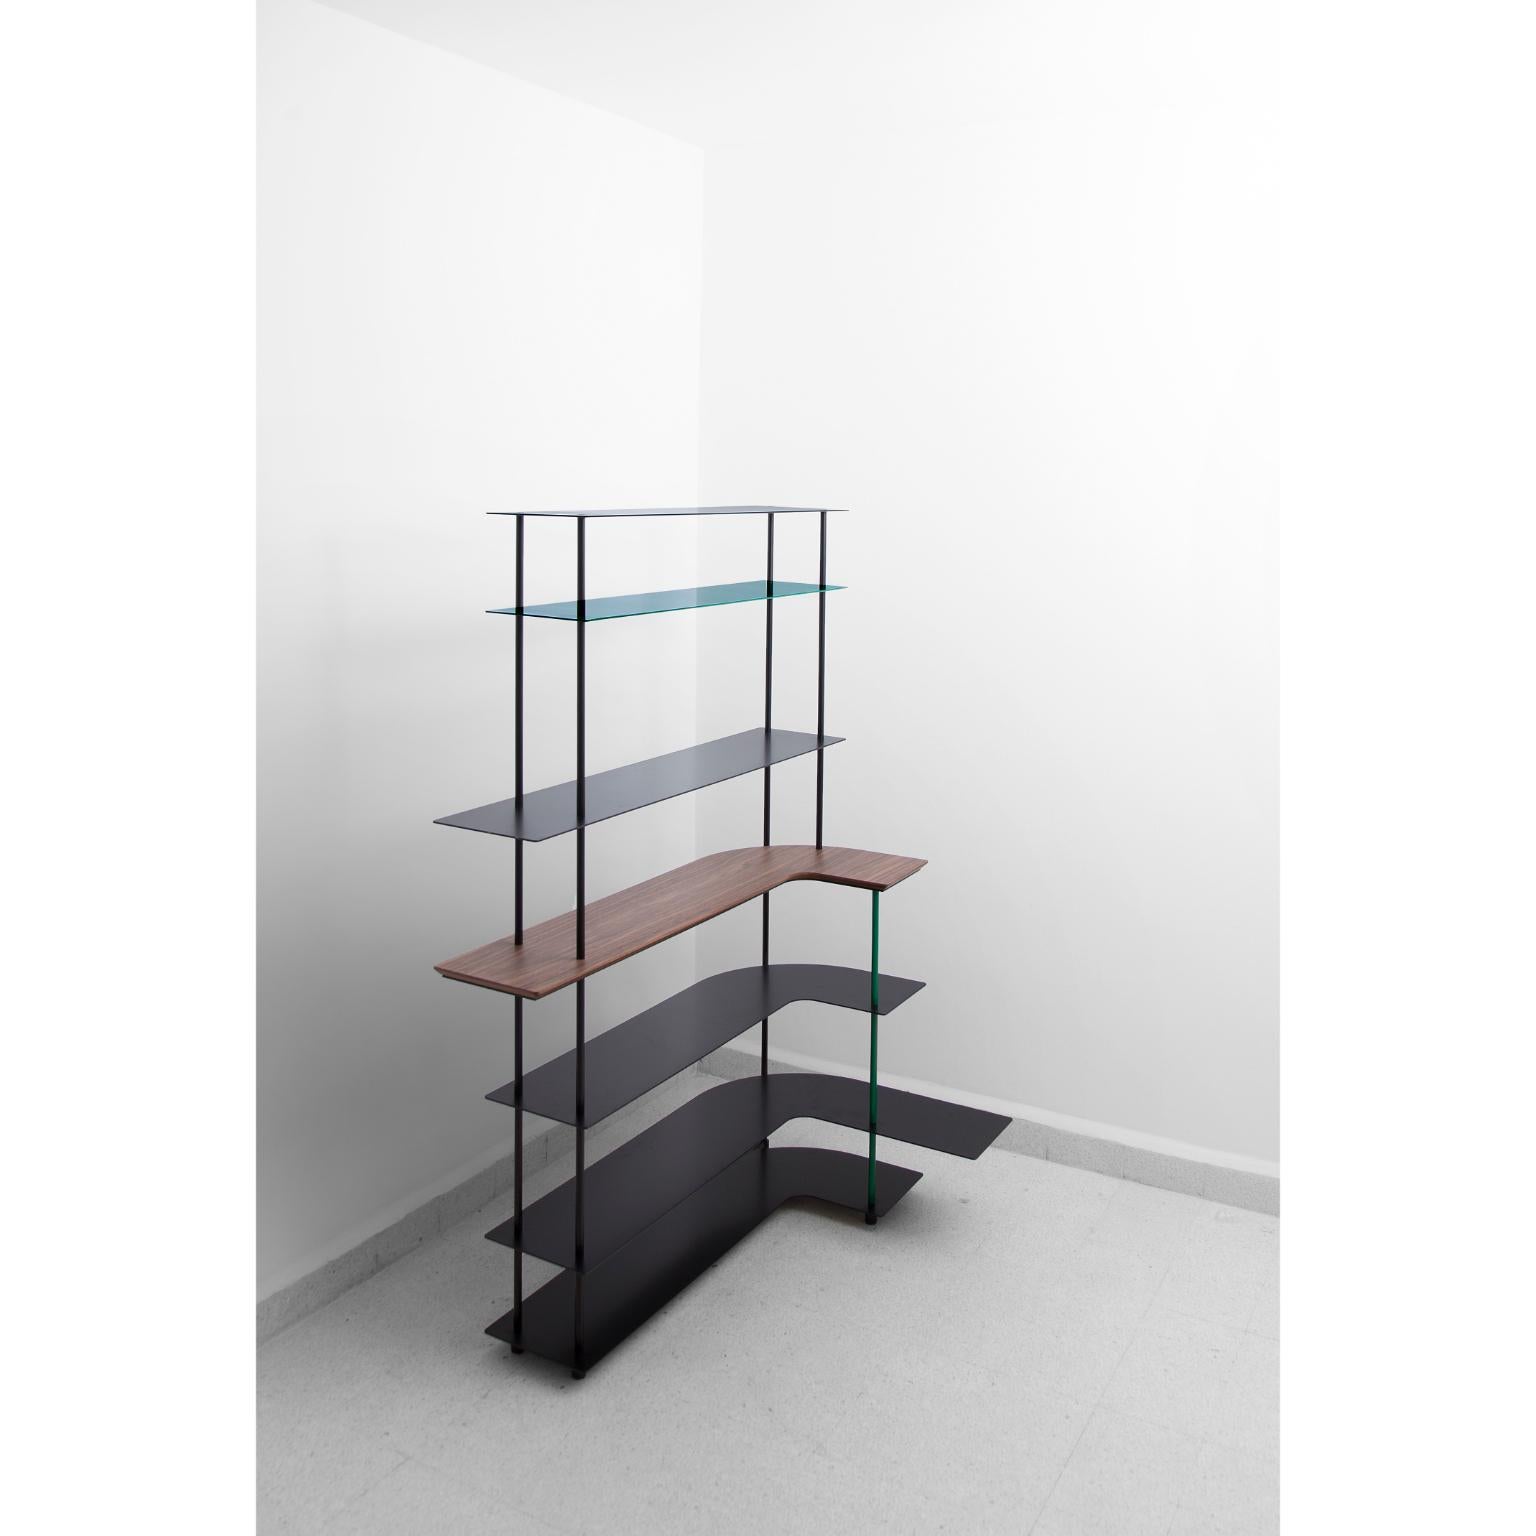 Fillet walnut shelf by Table Borgi Bastormagi
Dimensions: W 125 x D 70 x H 180 cm
Material: Steel, walnut wood
Other materials are available.

Fillet is a free standing shelving unit made to embrace the corner space. Recreating the smooth curve